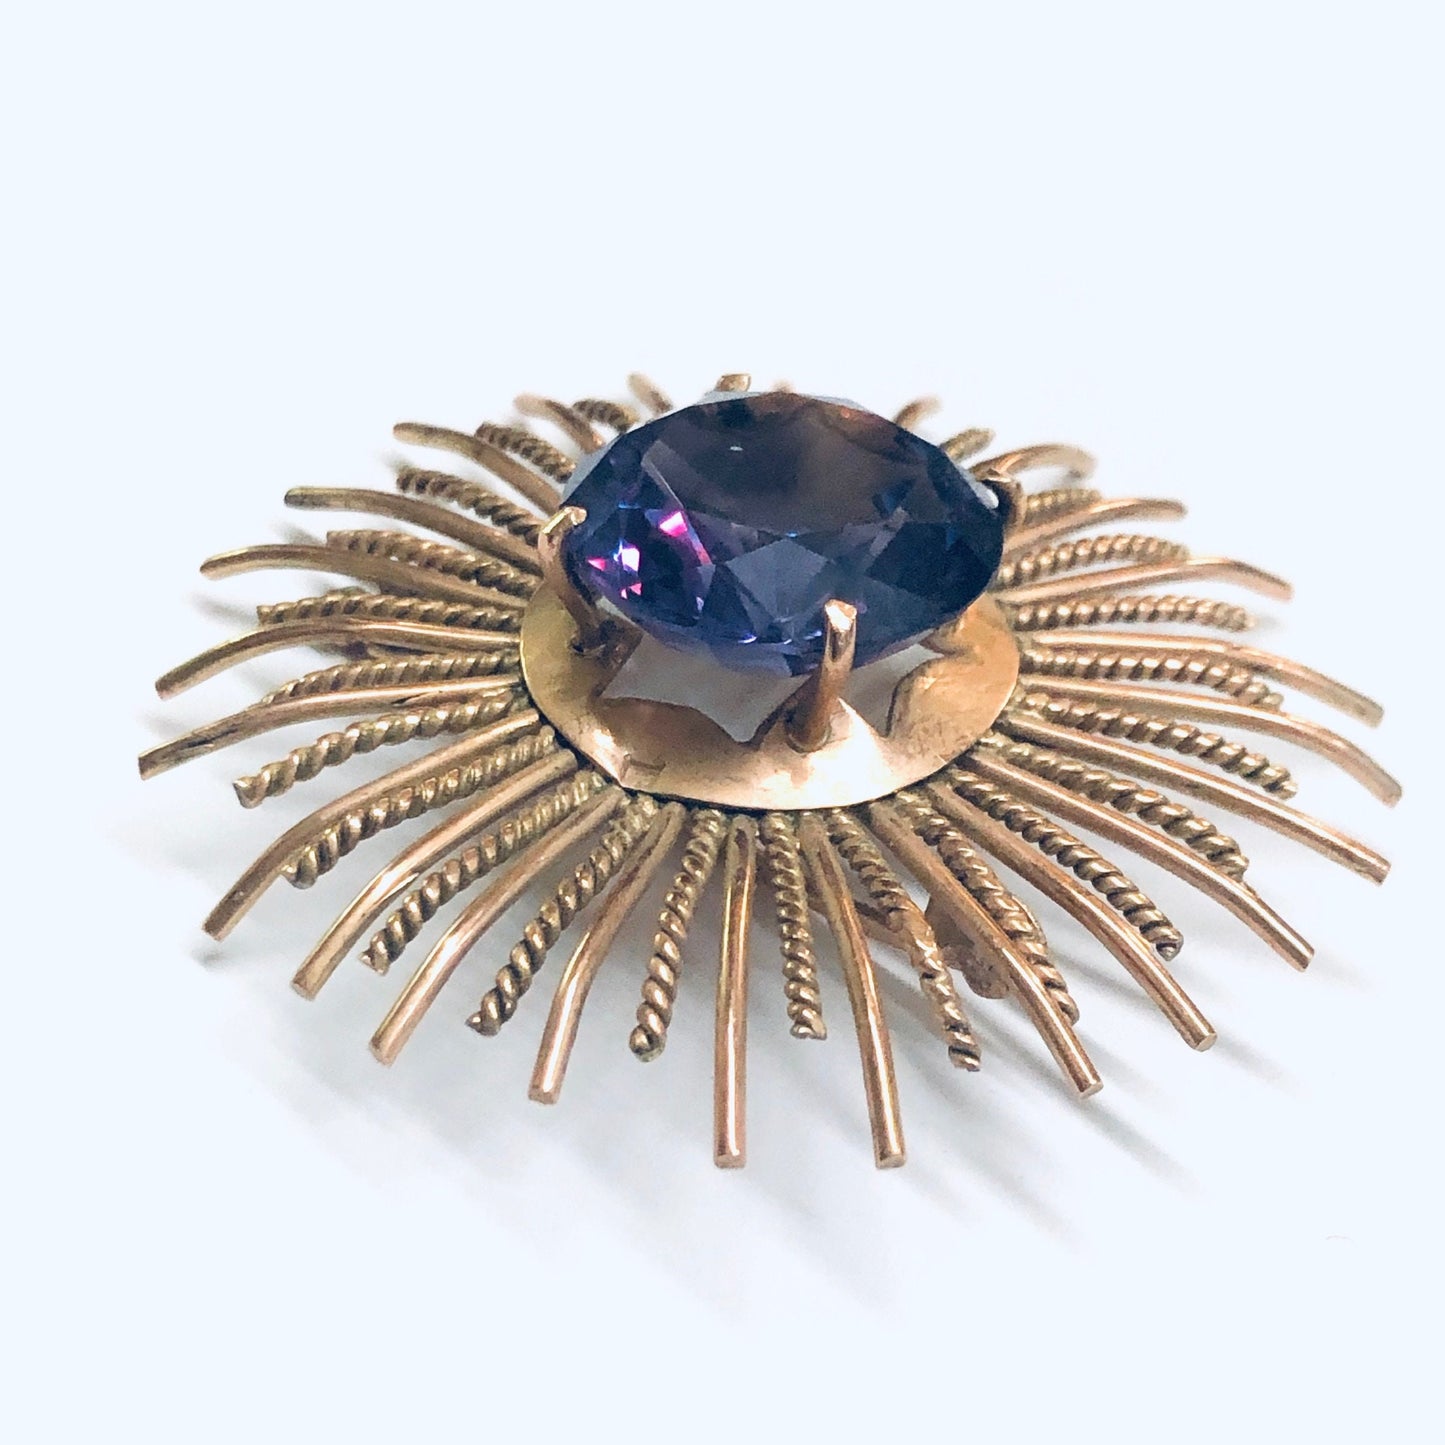 Vintage sunburst brooch in rose gold with a round purple and blue alexandrite gemstone at the center, featuring intricate metal rays radiating outward in a starburst design.